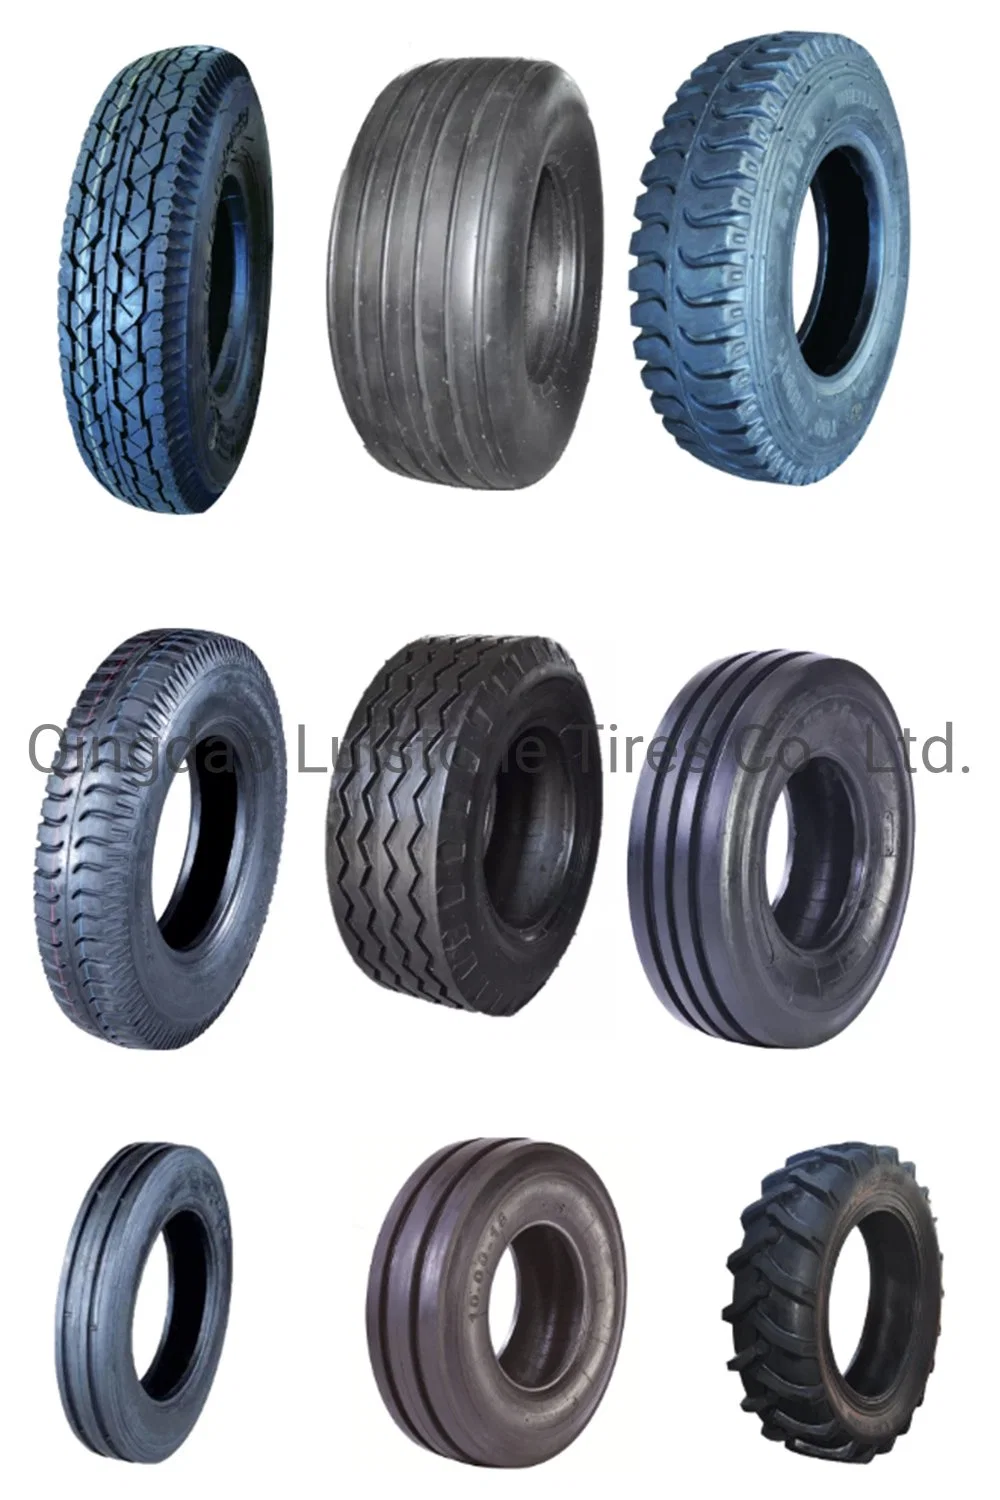 Strong Quality 18.4-28 R4 Pattern Agricultural Tires 16.9 R 34 Agricultural Tires